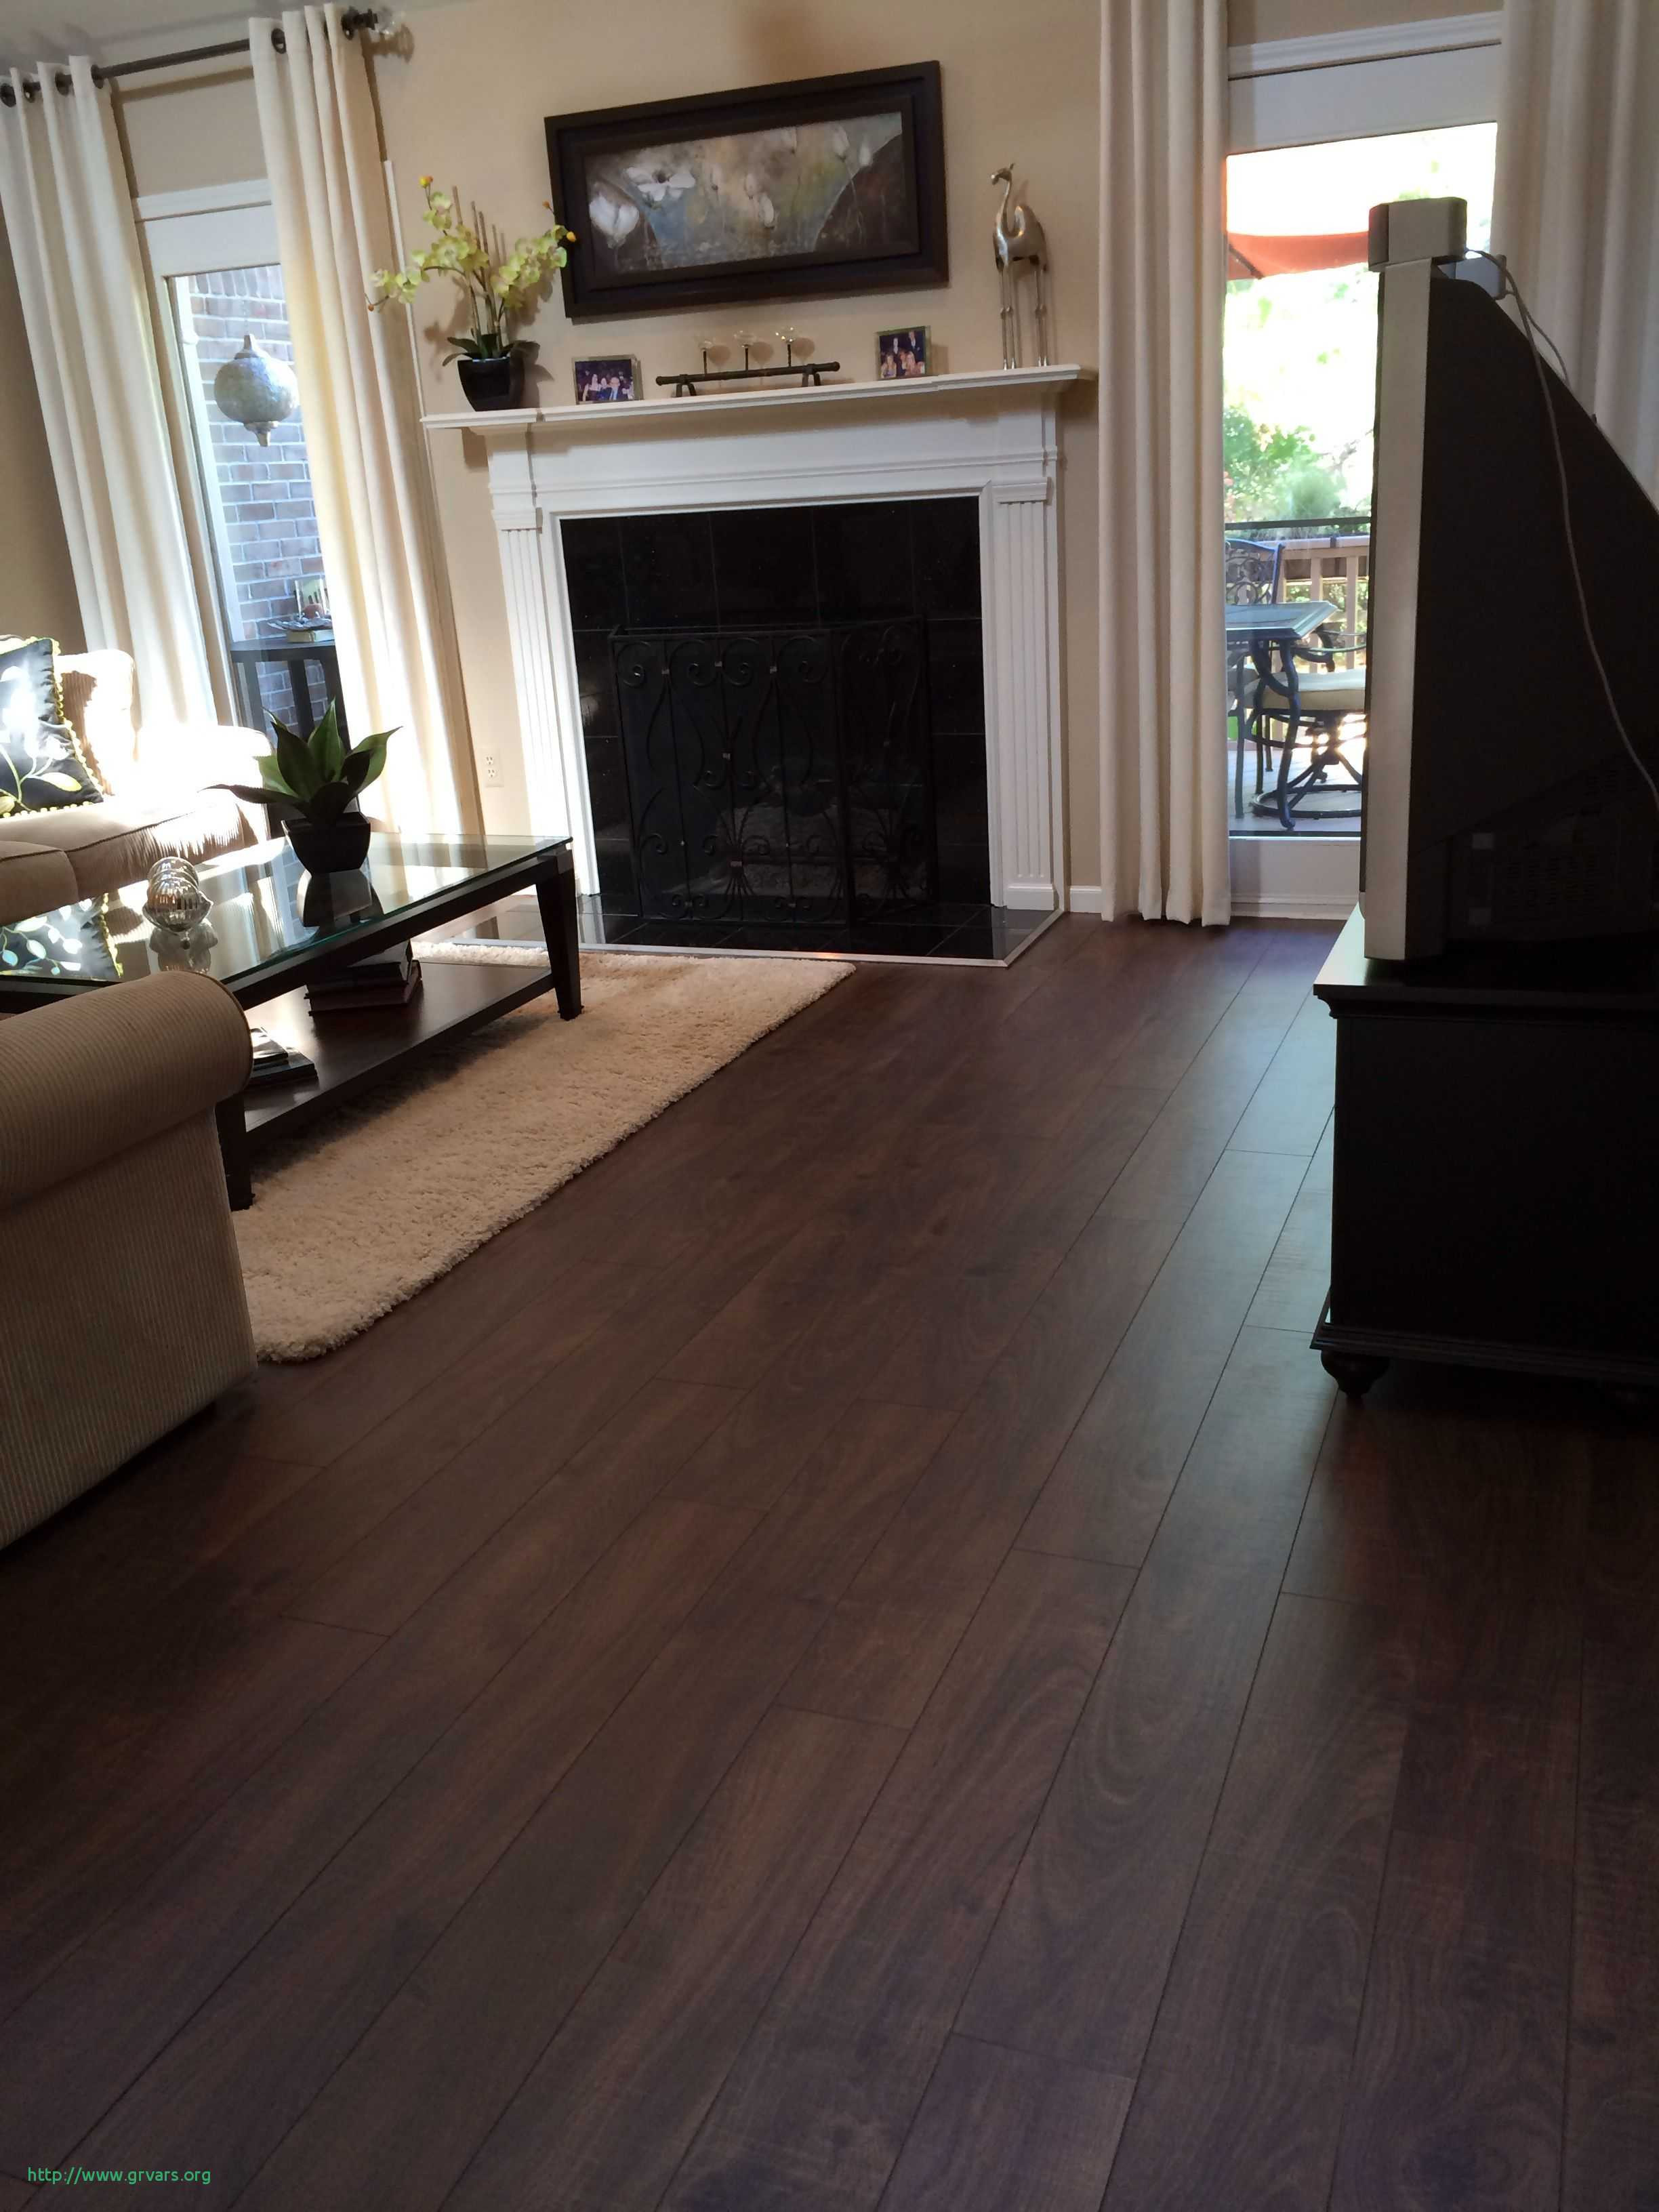 12 Spectacular Hardwood Flooring Reviews 2024 free download hardwood flooring reviews of 24 luxe floors for less reviews ideas blog with pergo flooring lovely s media cache ak0 pinimg 736x 43 0d 97 inspiration of how to